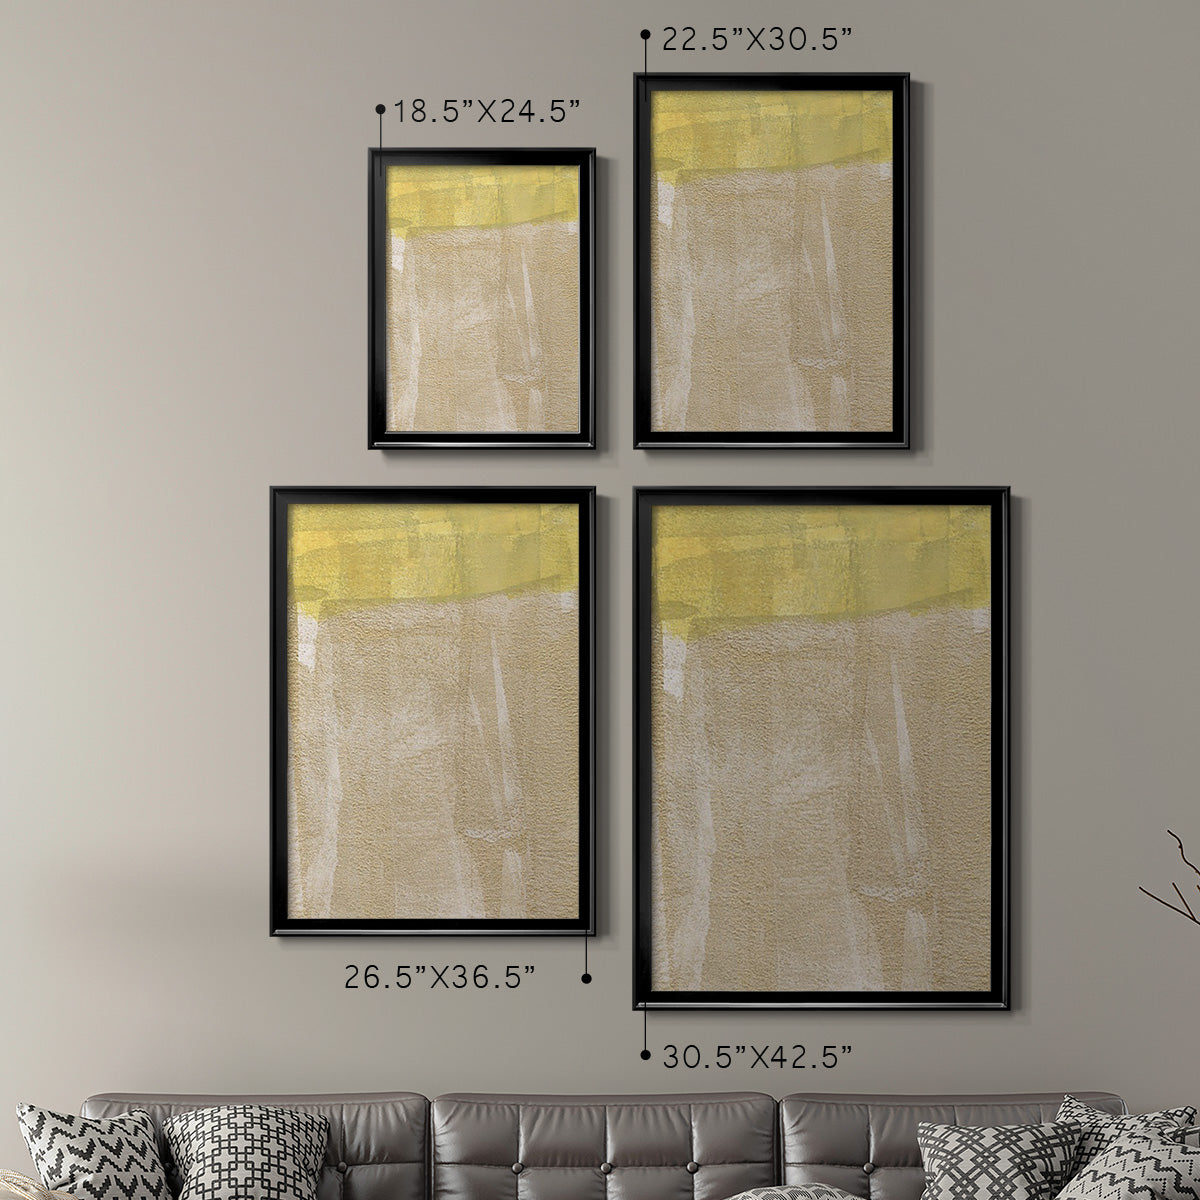 Vovere II Premium Framed Print - Ready to Hang